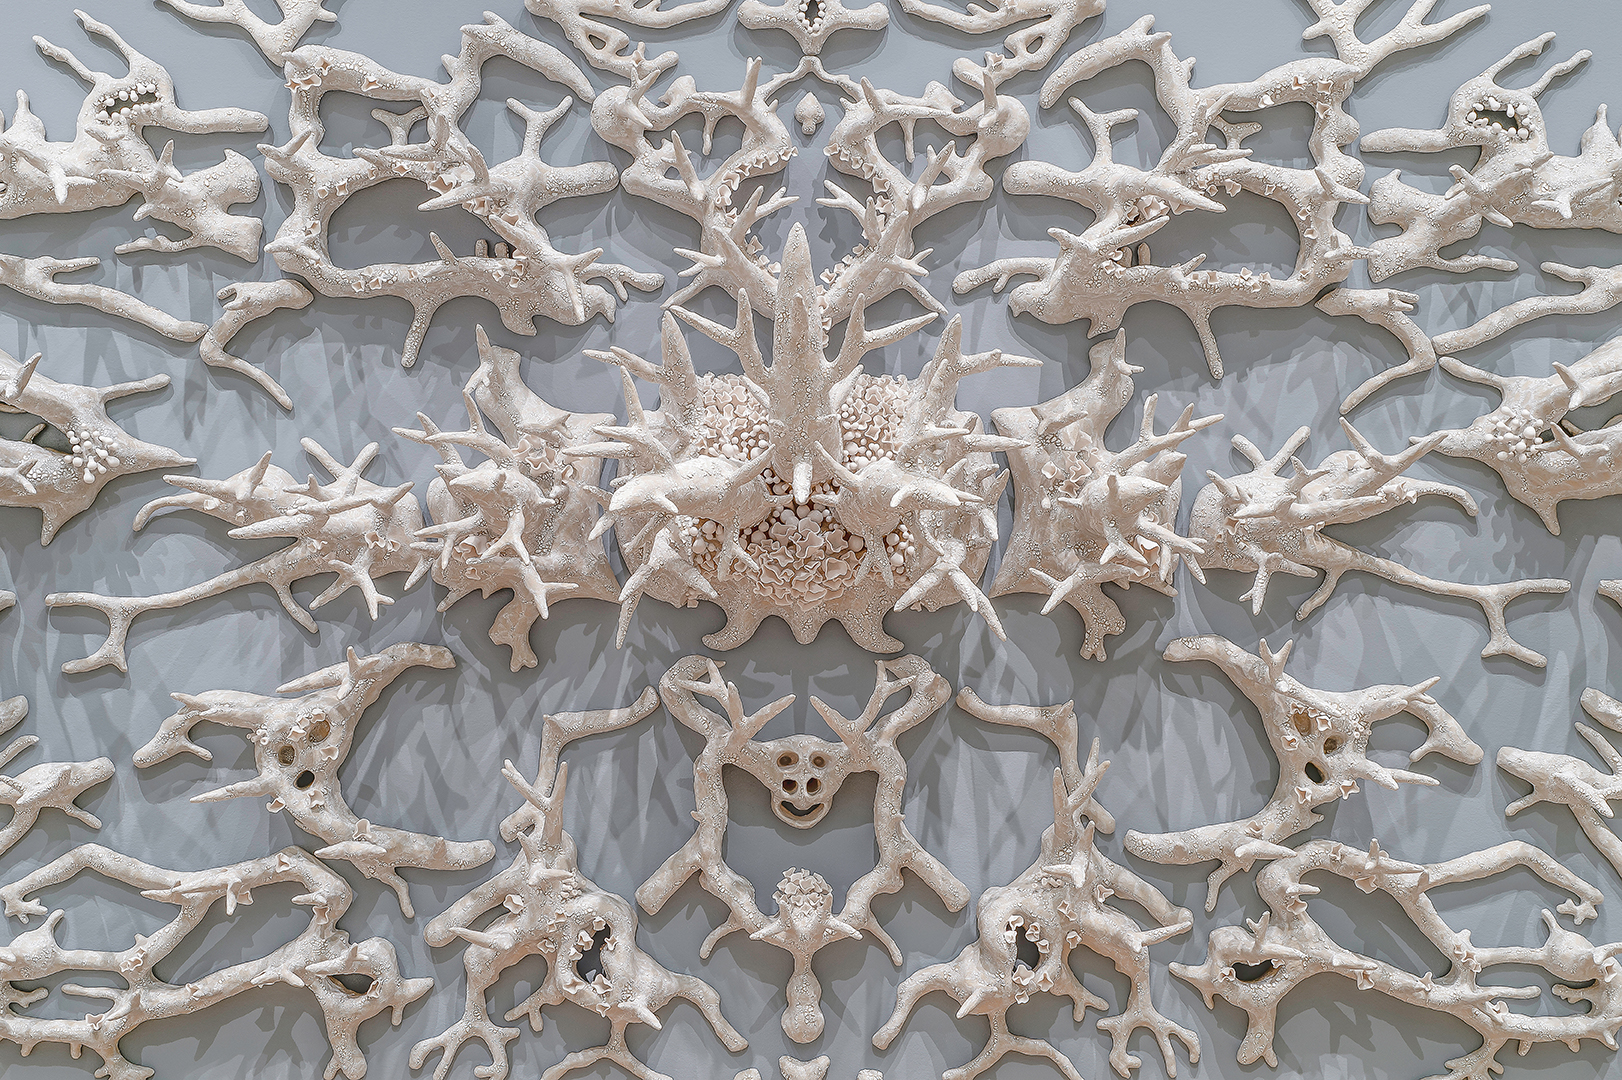 Courtney Mattison, Malum Geminos (“Evil Twins” in Latin) (detail)(2019). Glazed stoneware and porcelain. Dimensions: 7’ h x 21’ w x 2’ d. Photograph by Paul Mutino for the Florence Griswold Museum. ©2019 Courtney Mattison. Courtesy of the artist.